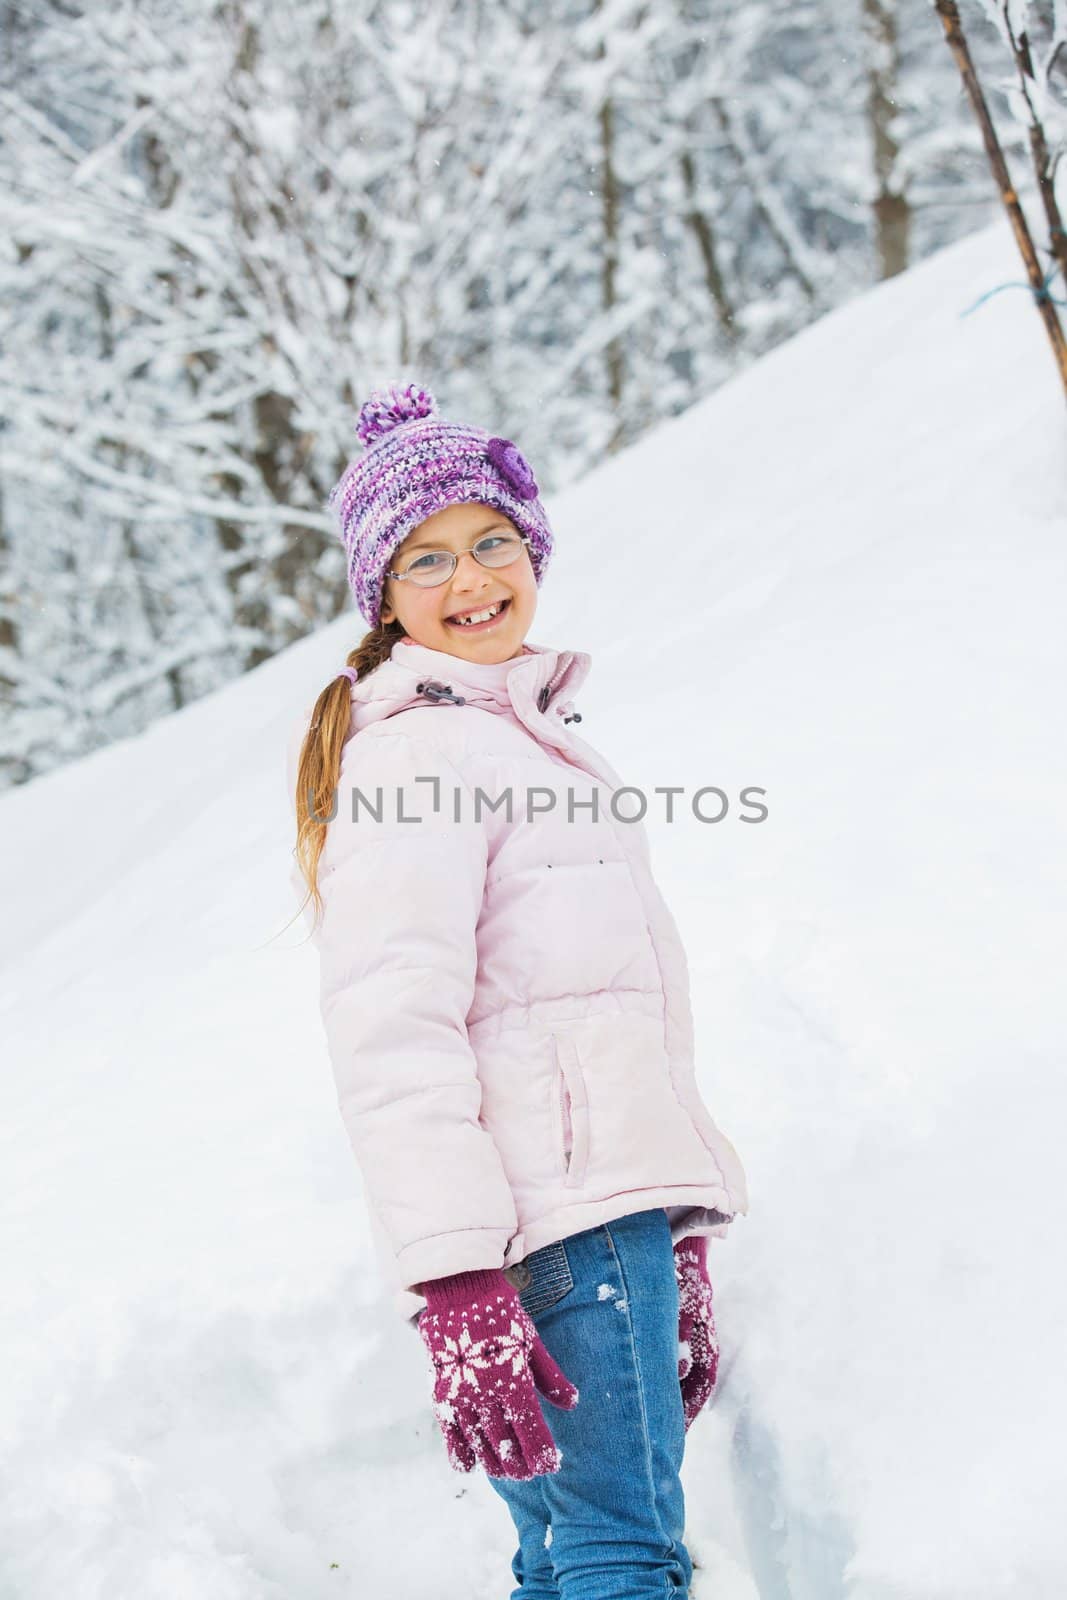 Smiling happy girl having fun outdoors on snowing winter day in Alps playing in snow. Vertical view